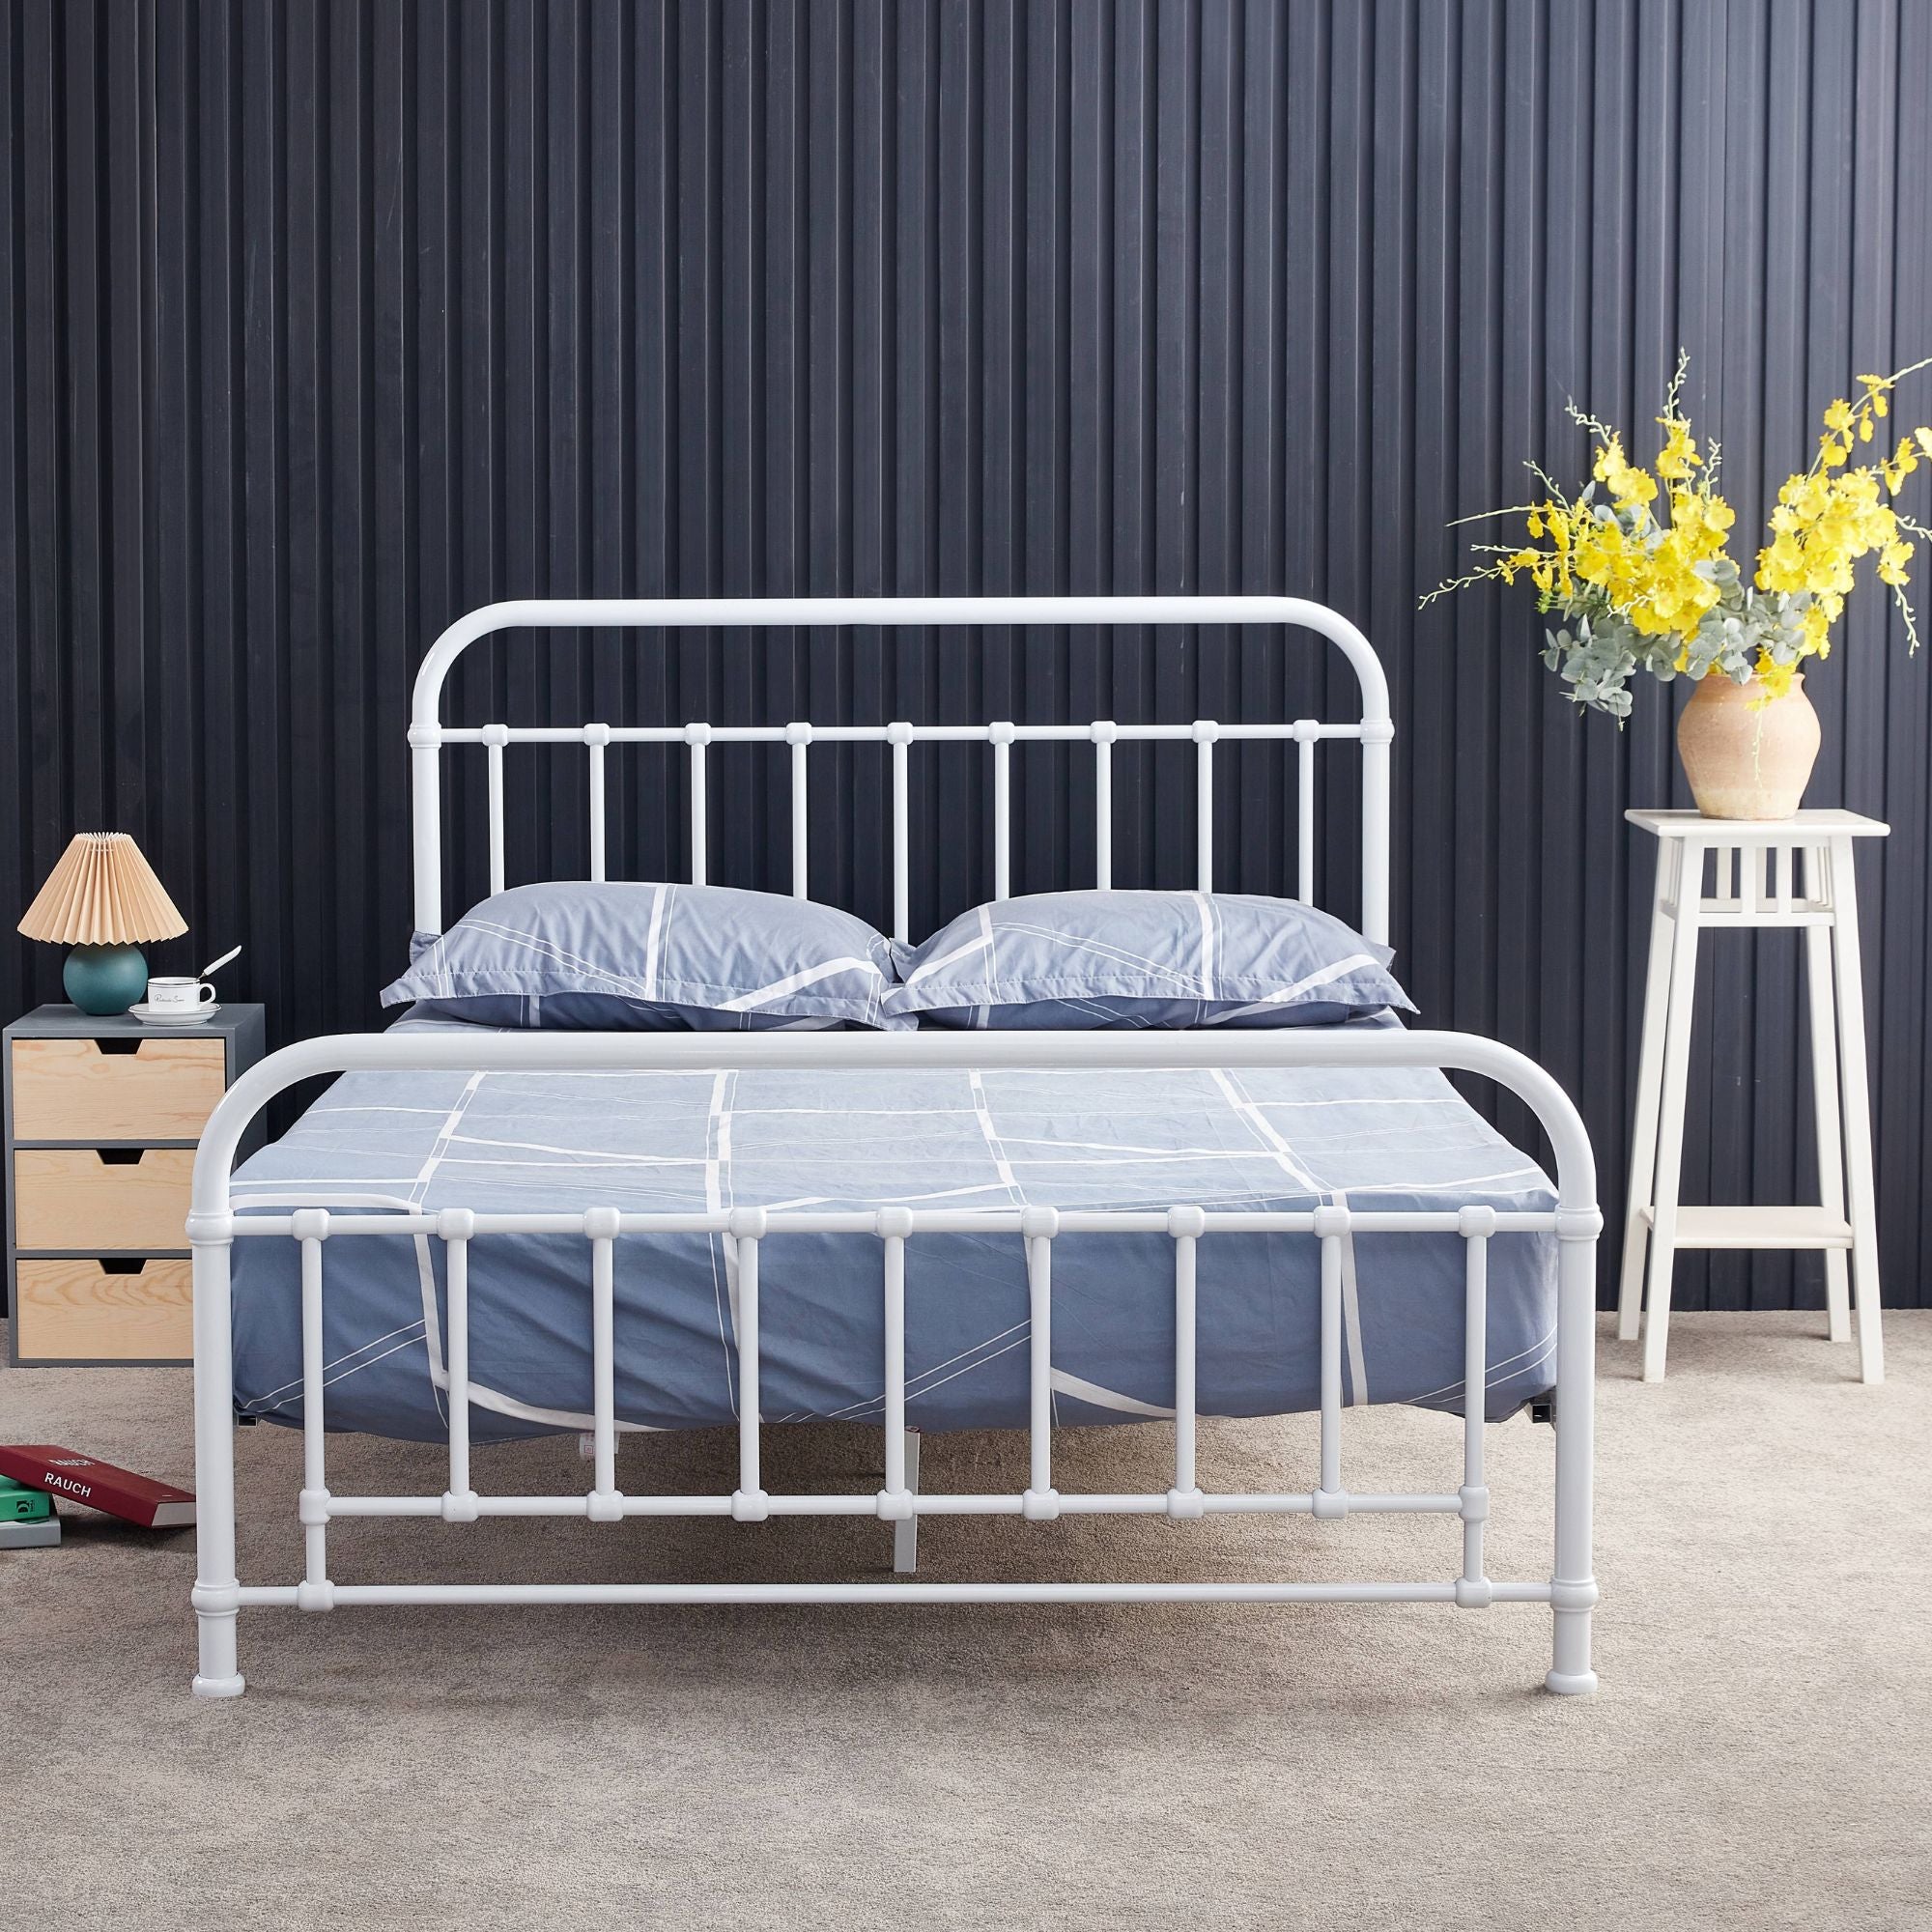 Queen Size Bed Metal - White